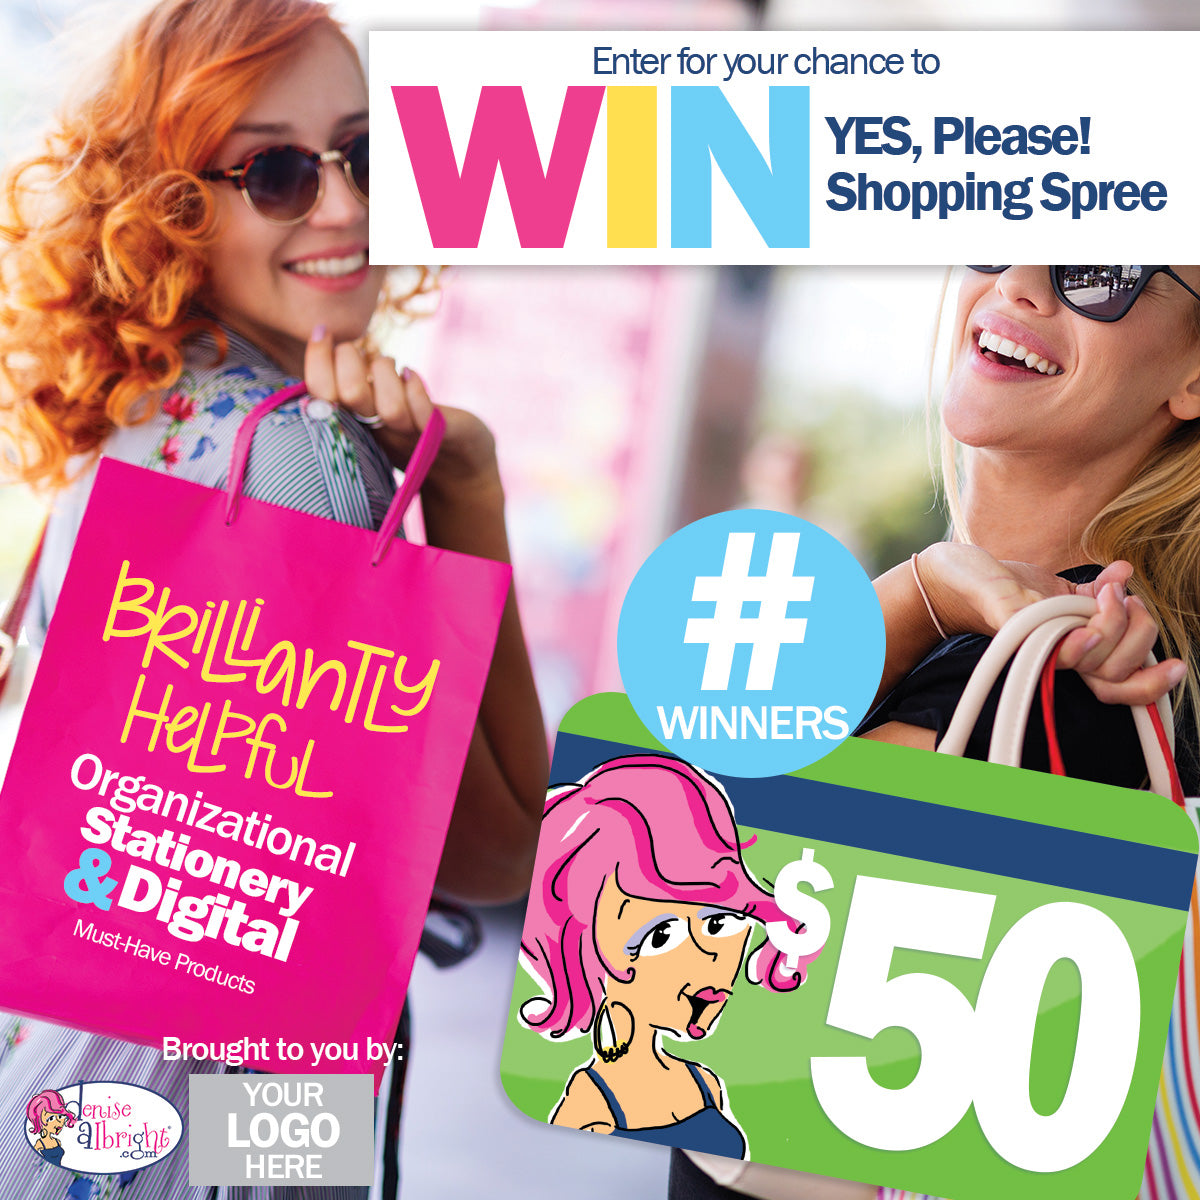 Shopping Spree Poster - Shopping bags 